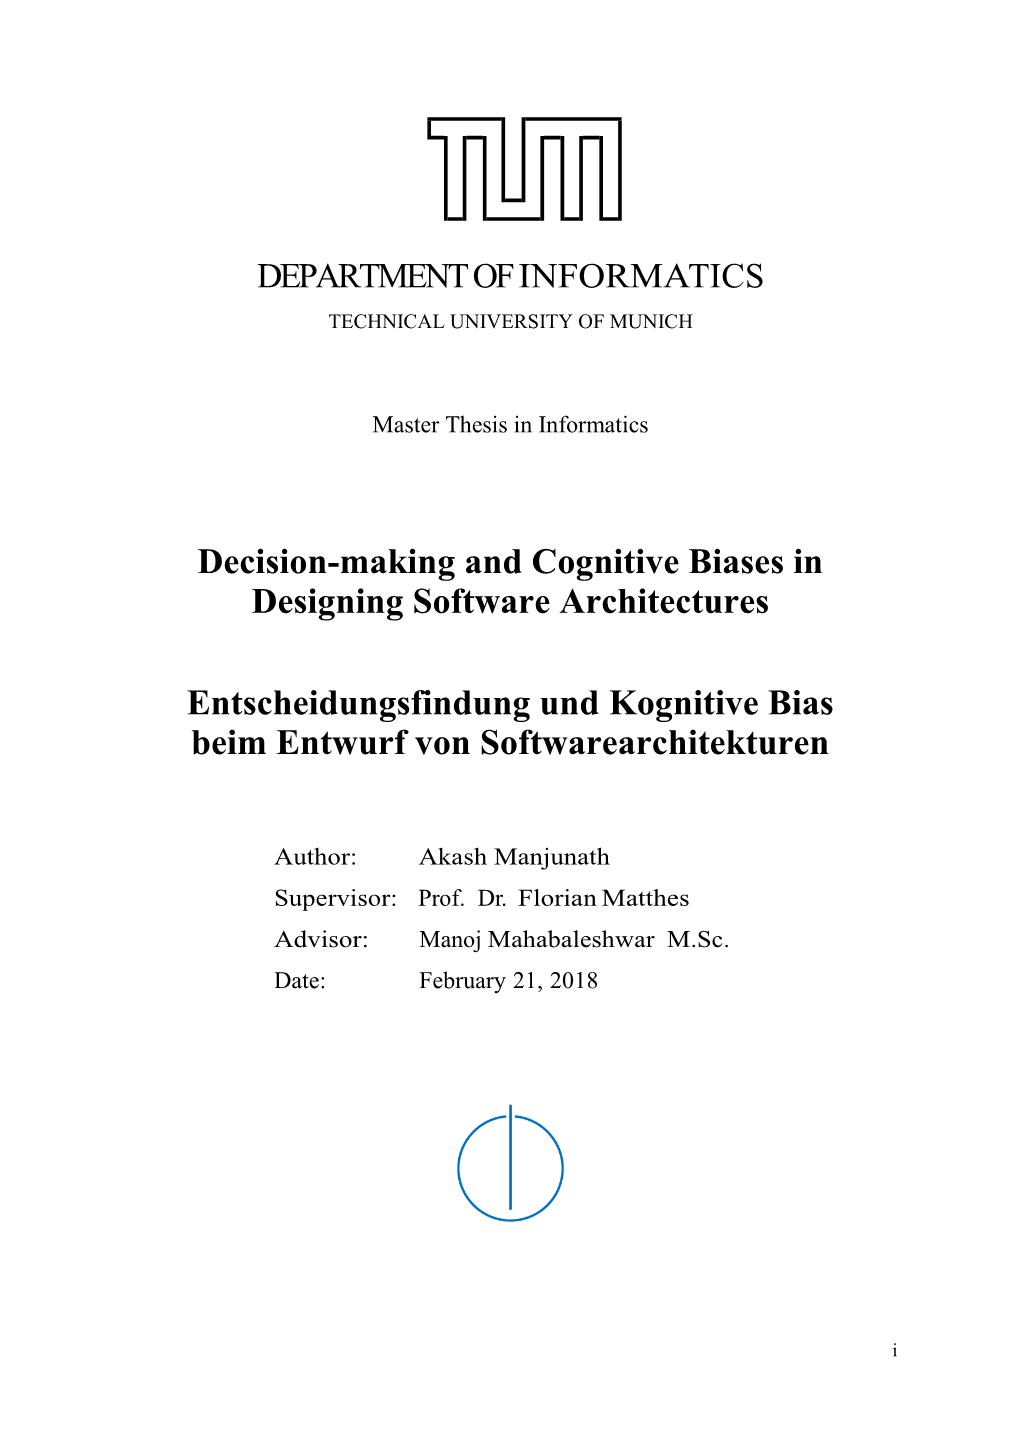 Decision-Making and Cognitive Biases in Designing Software Architectures